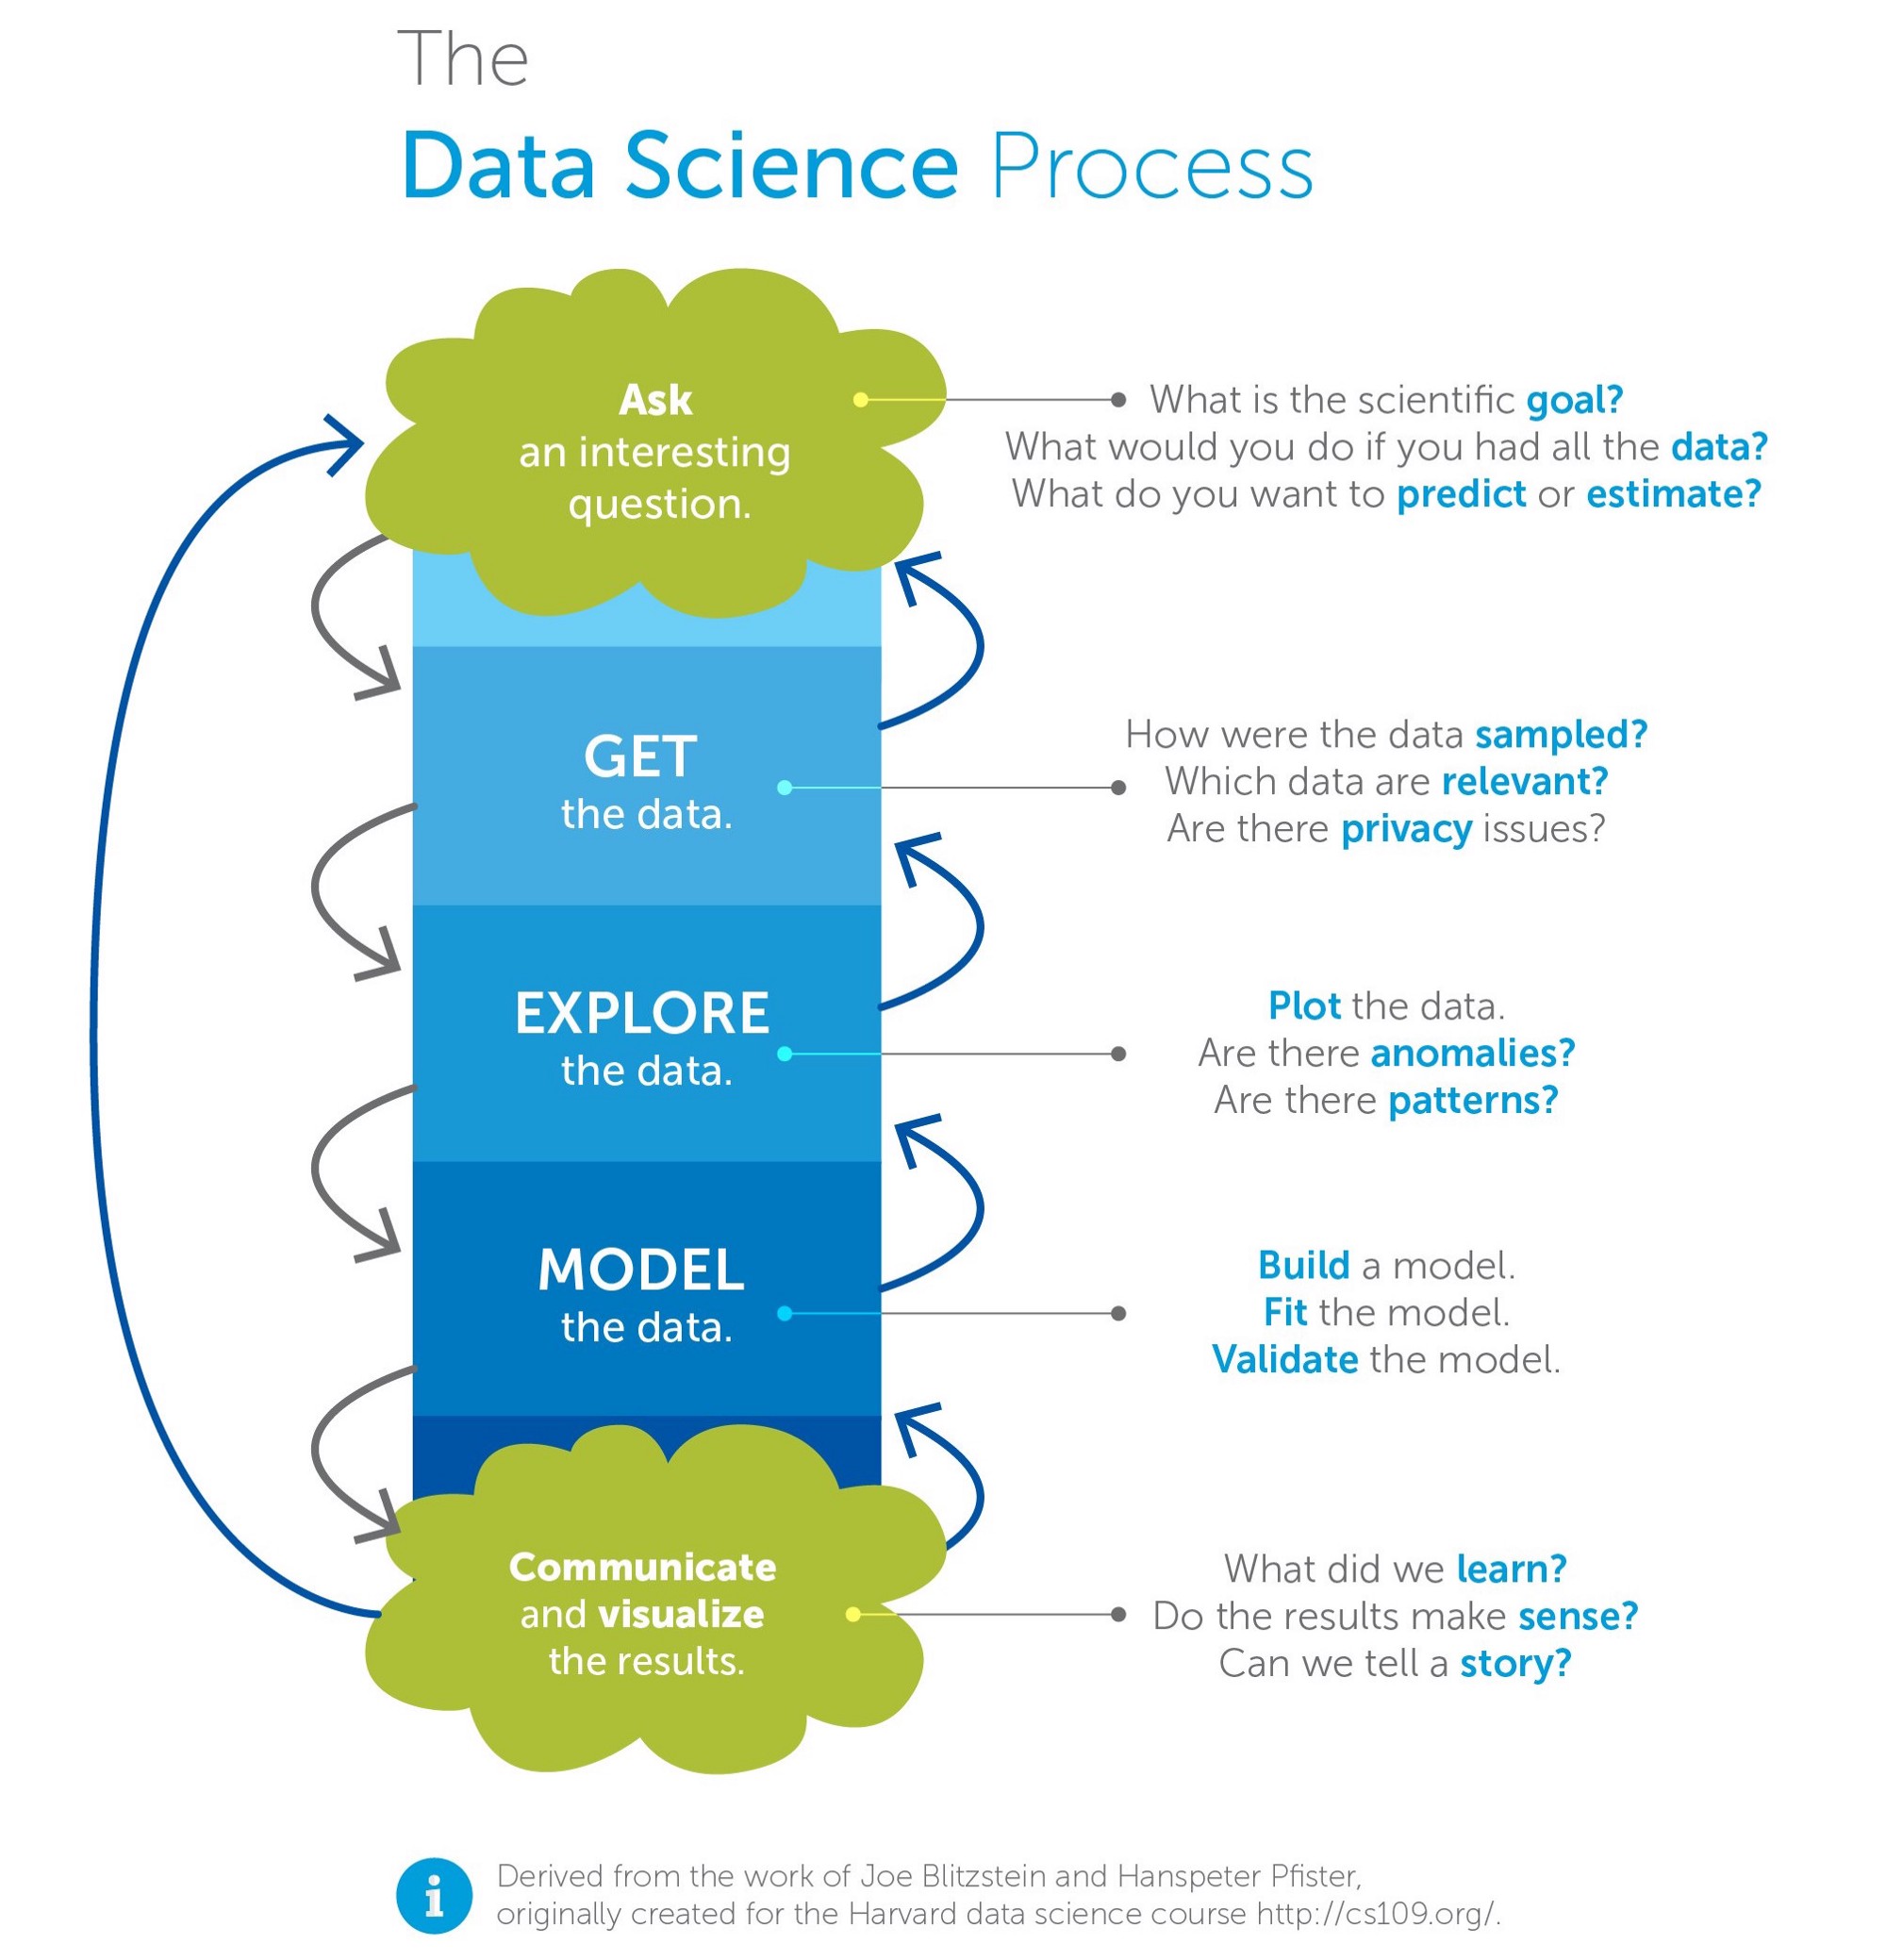 design a case study to explain the data science process